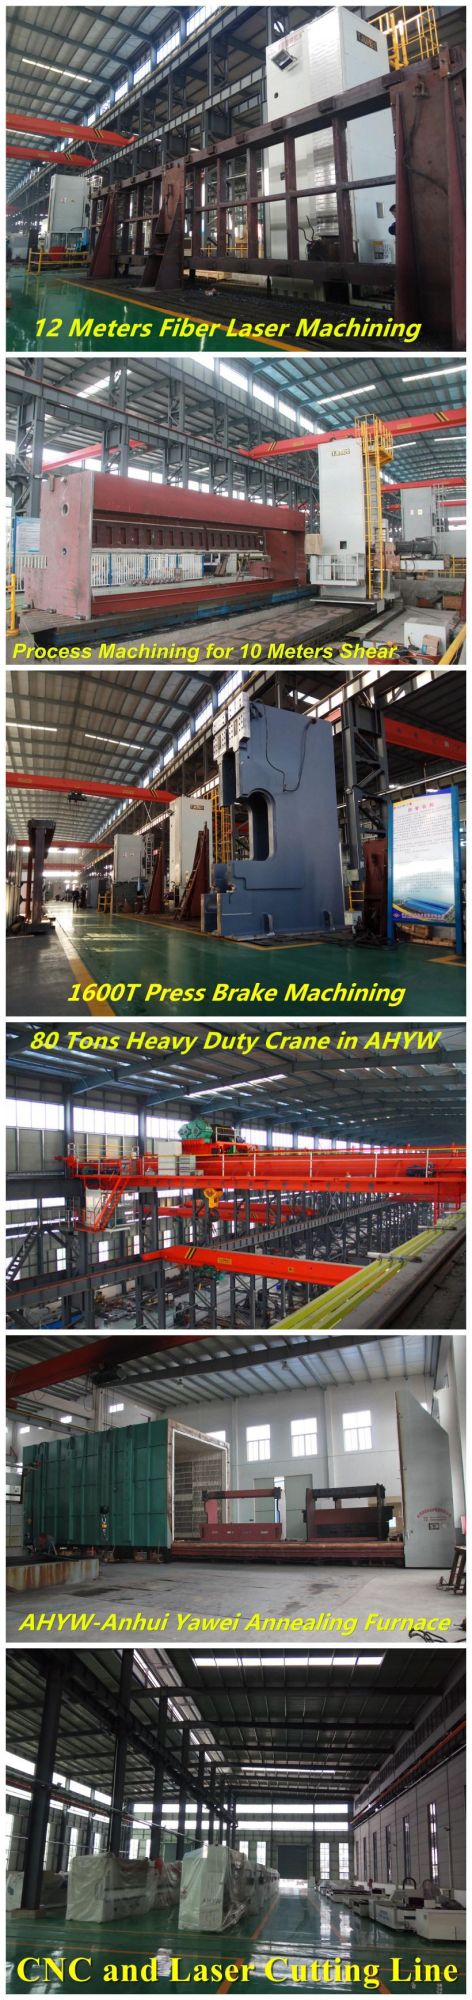 Steel Guillotine Cutter Machine From Anhui Yawei with Ahyw Logo for Metal Sheet Cutting